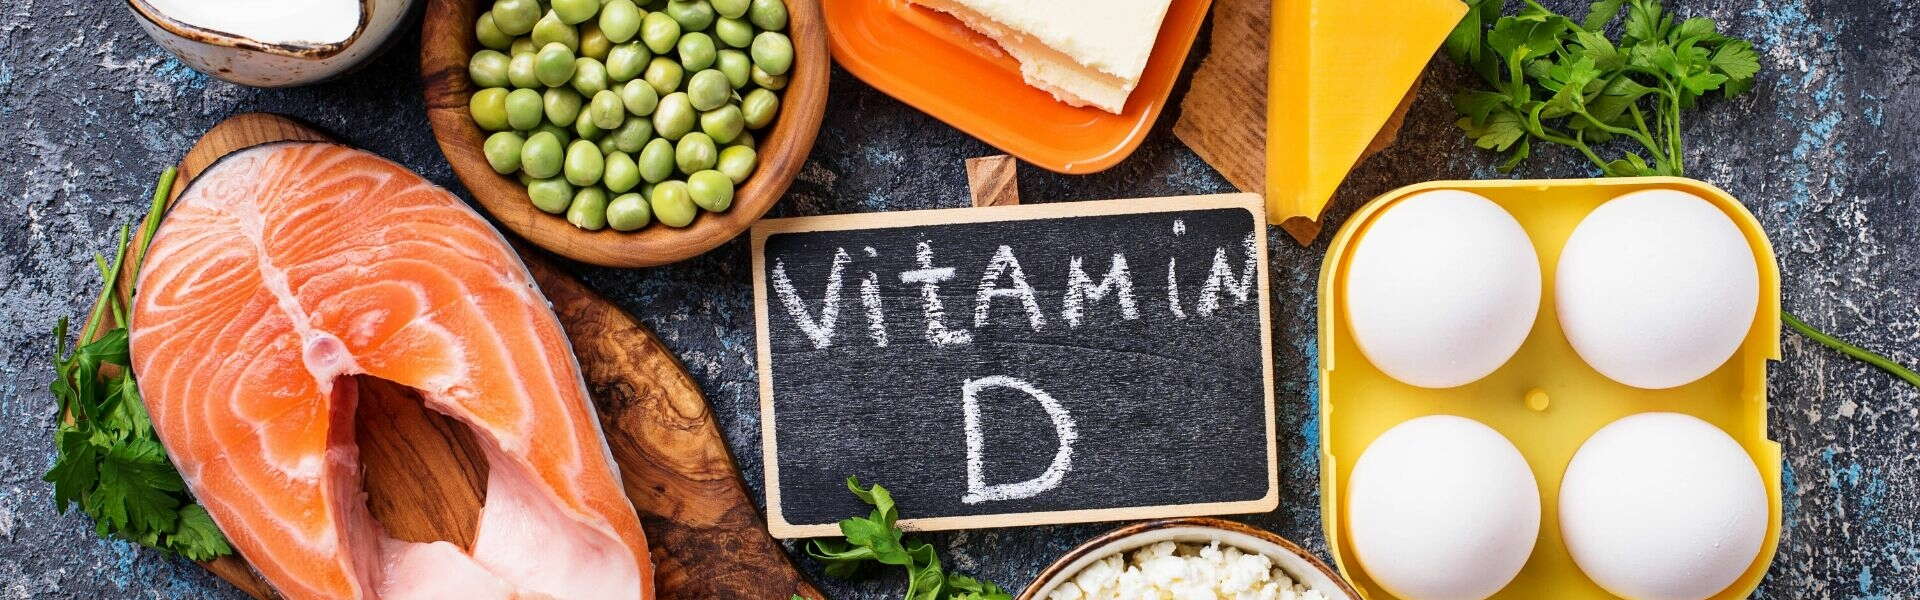 Vitamin D | Benefits and the 5 richest foods